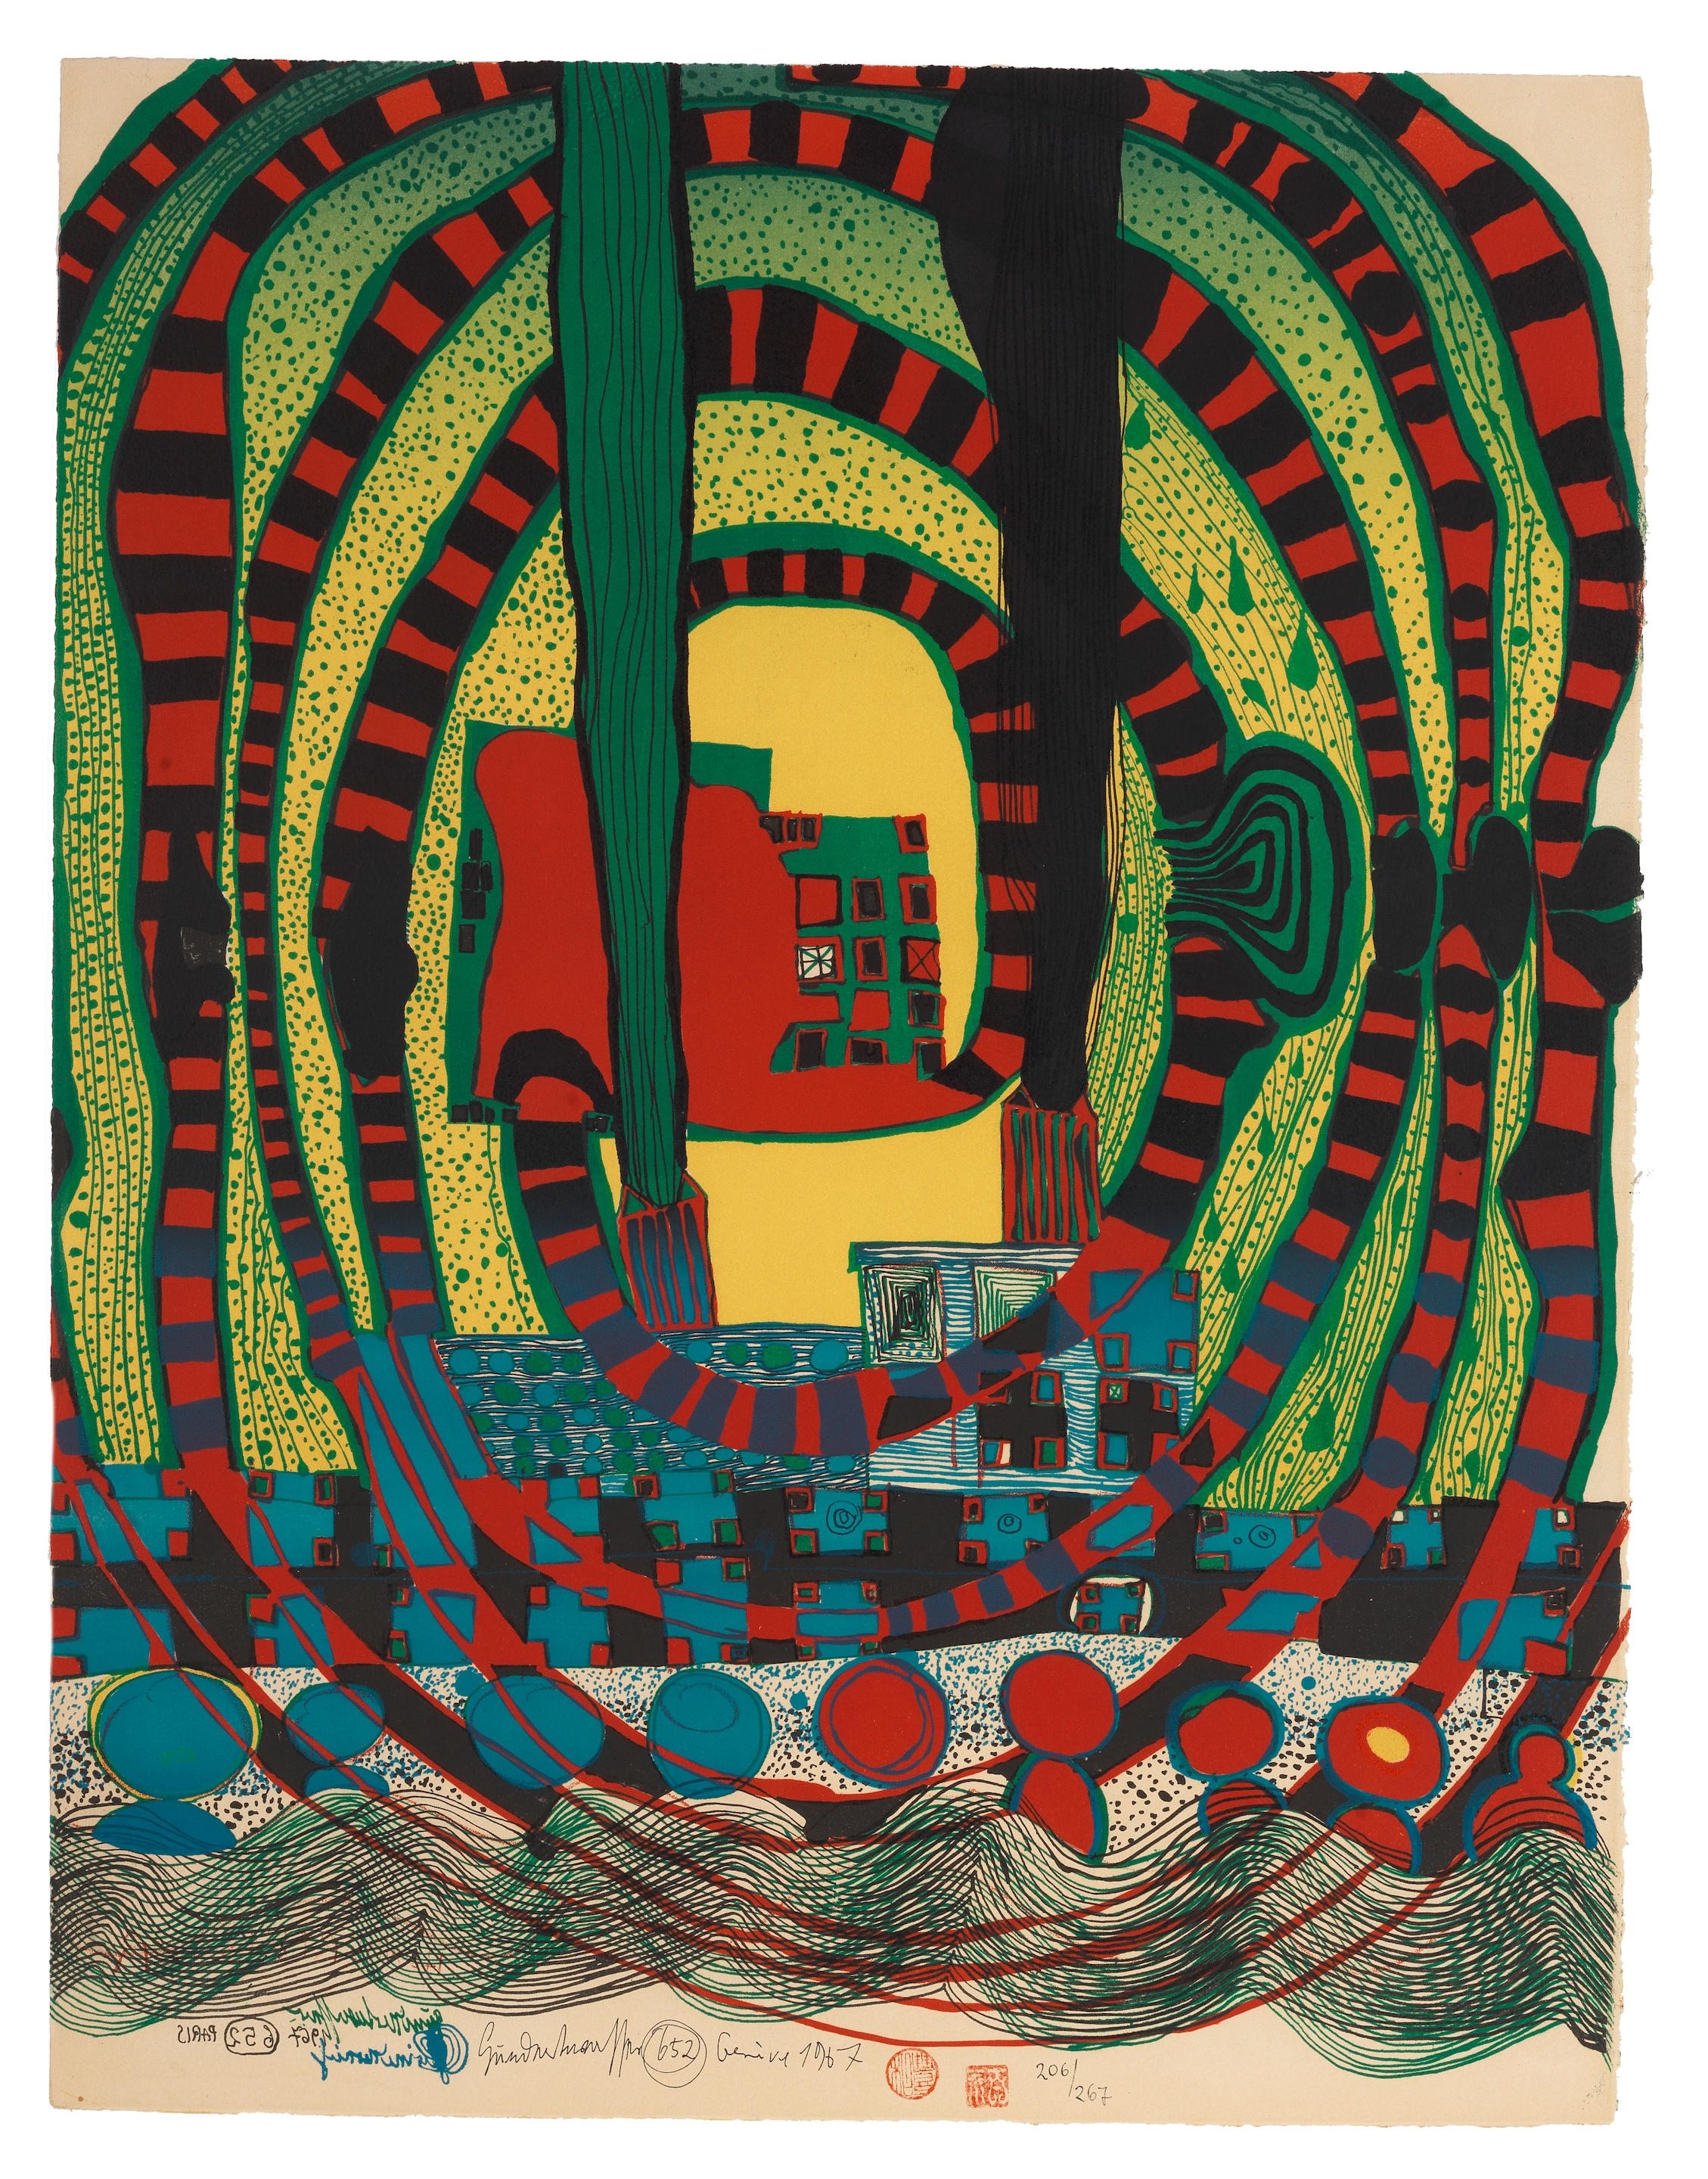 Artwork by Friedensreich Hundertwasser, Seereise II, Made of lithograph in colours, 1967, on wove paper